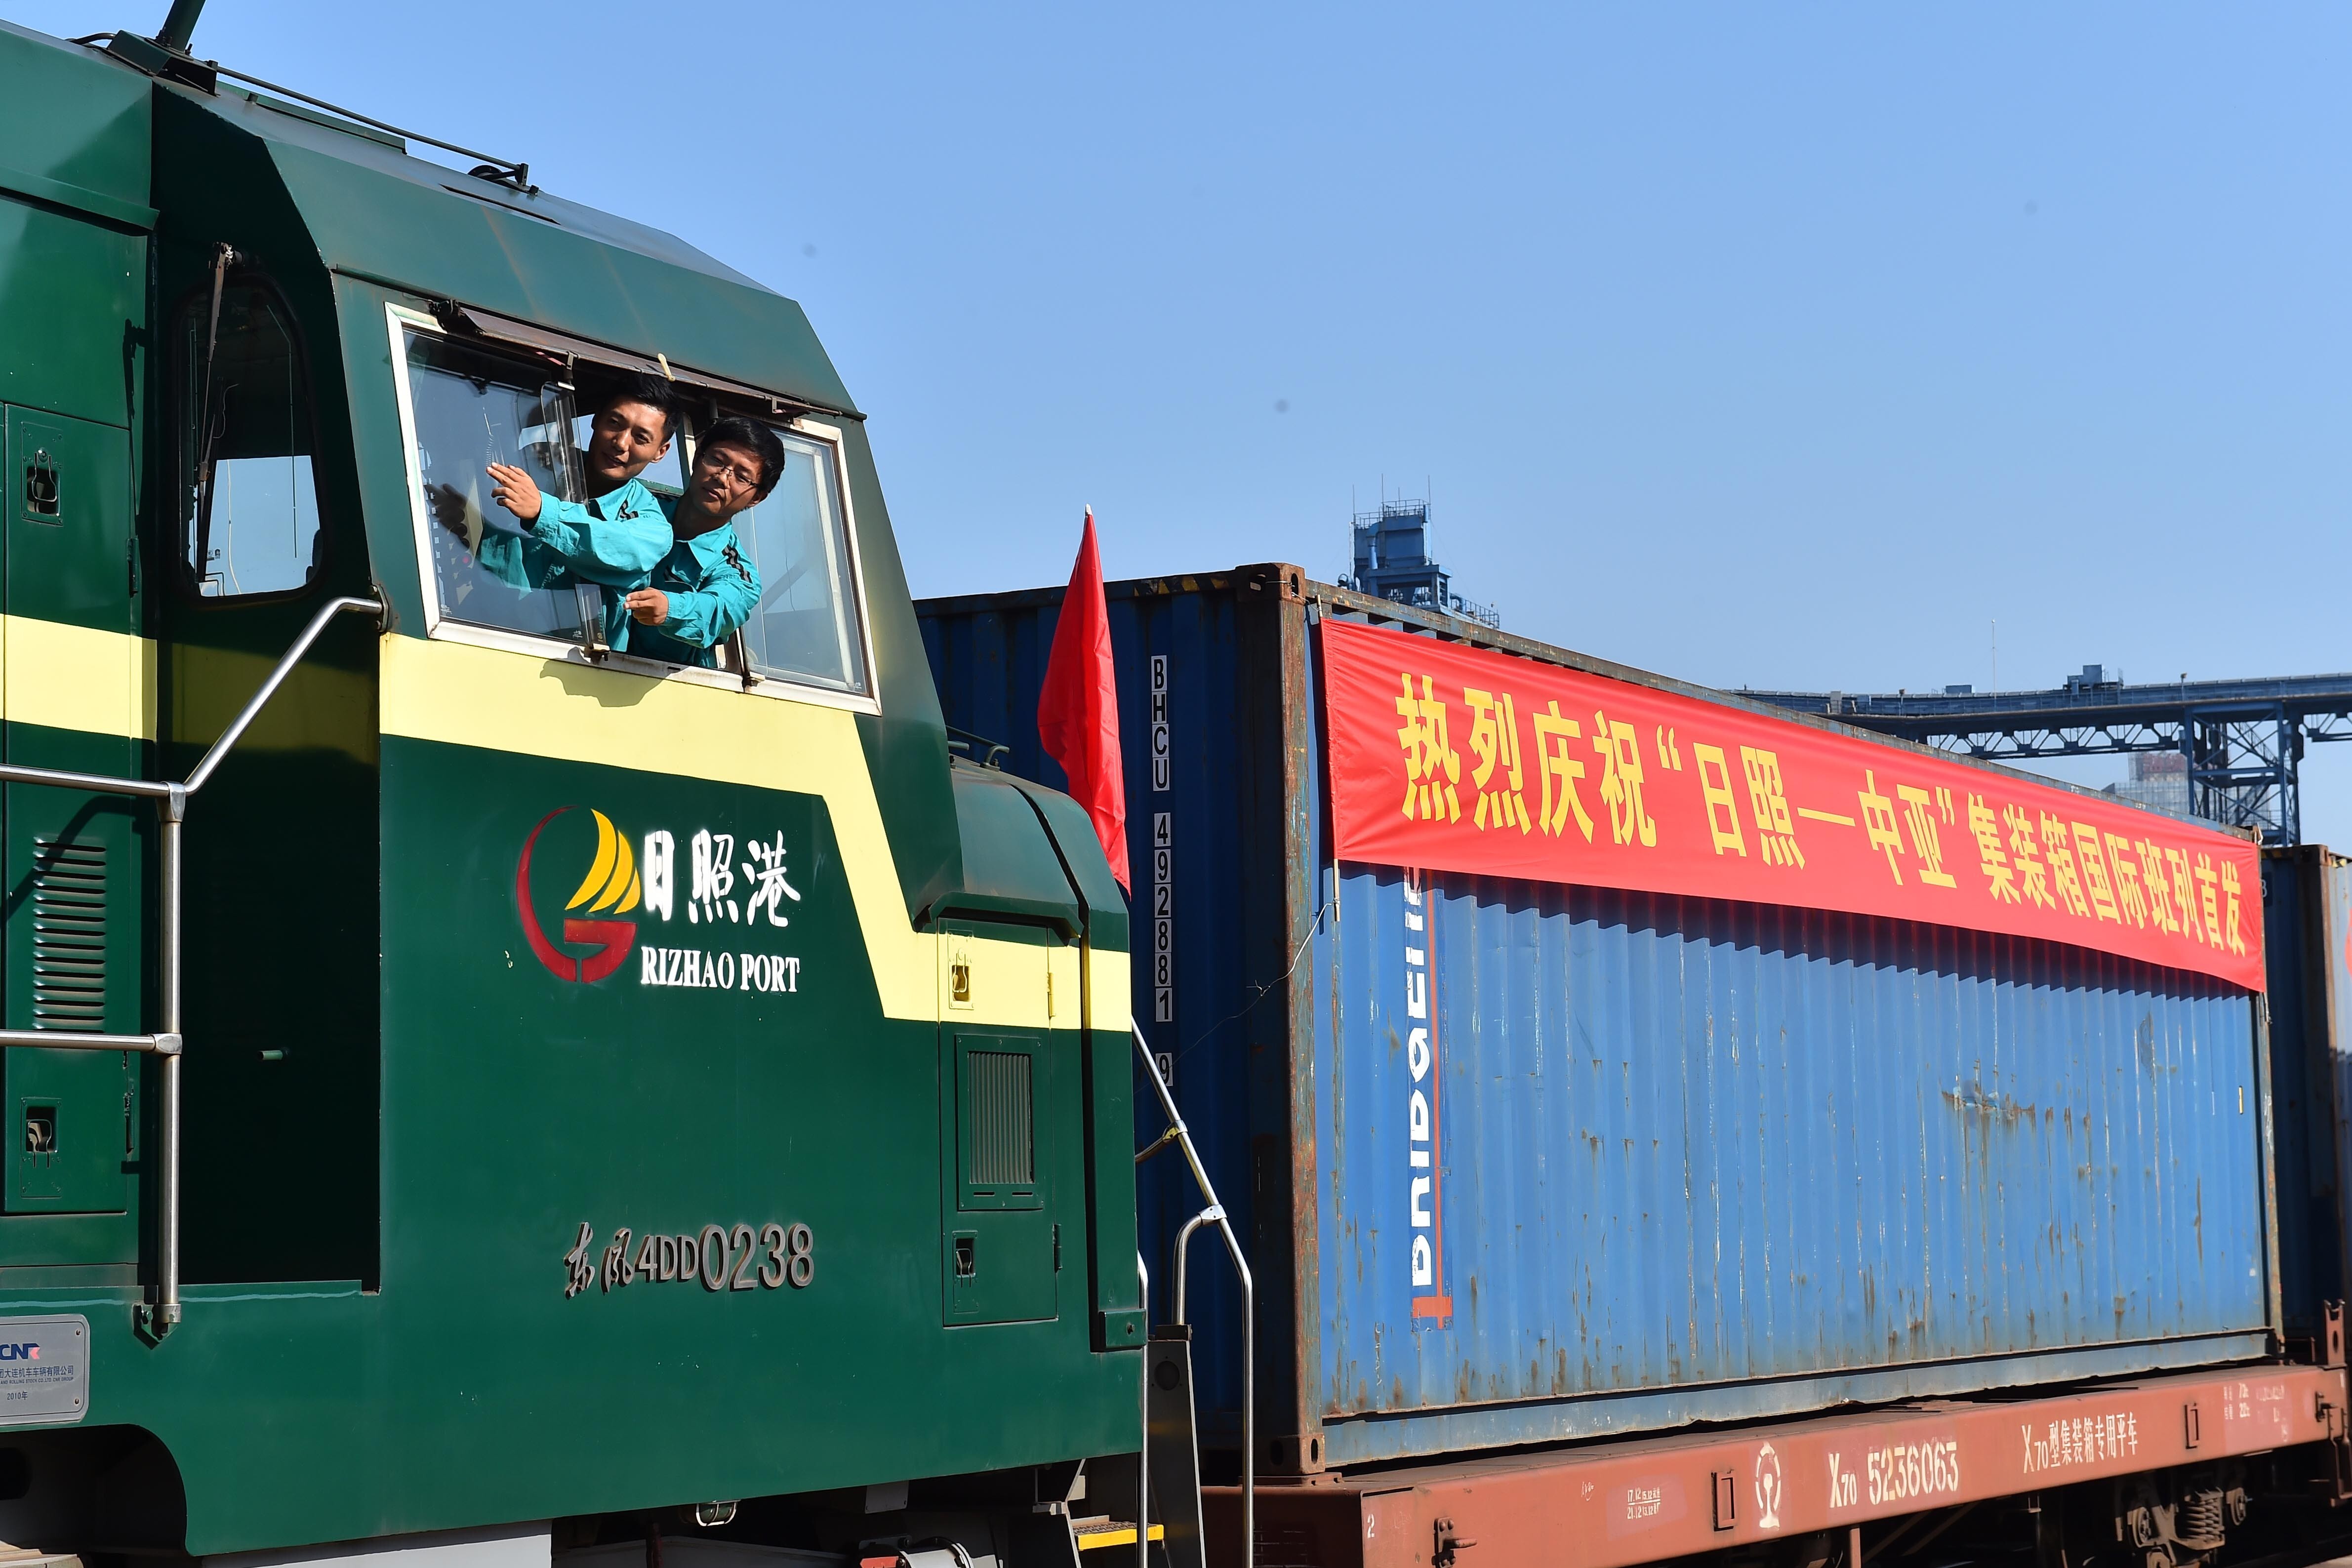 A freight train from Rizhao to Central Asia leaves a container station at Rizhao port in east China's Shandong province on September 12, 2017. China has lent heavily to various countries as part of its Belt and Road Initiative, and many are now looking to restructure their debt. Photo: Xinhua